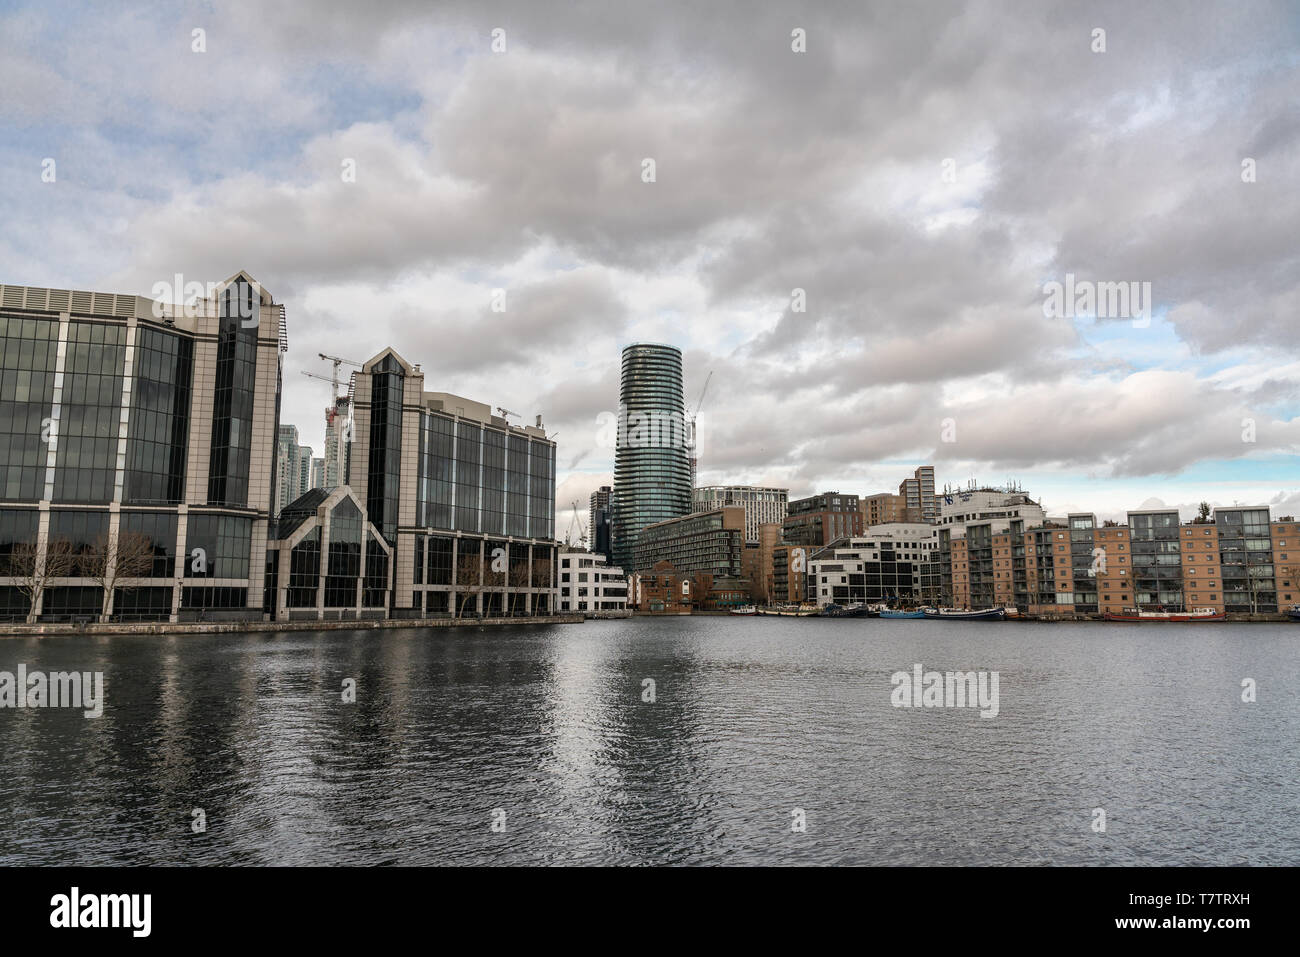 London, UK - March 05, 2019: Flats and houses along the banks of Canary Wharf, oversee river side apartments. Stock Photo